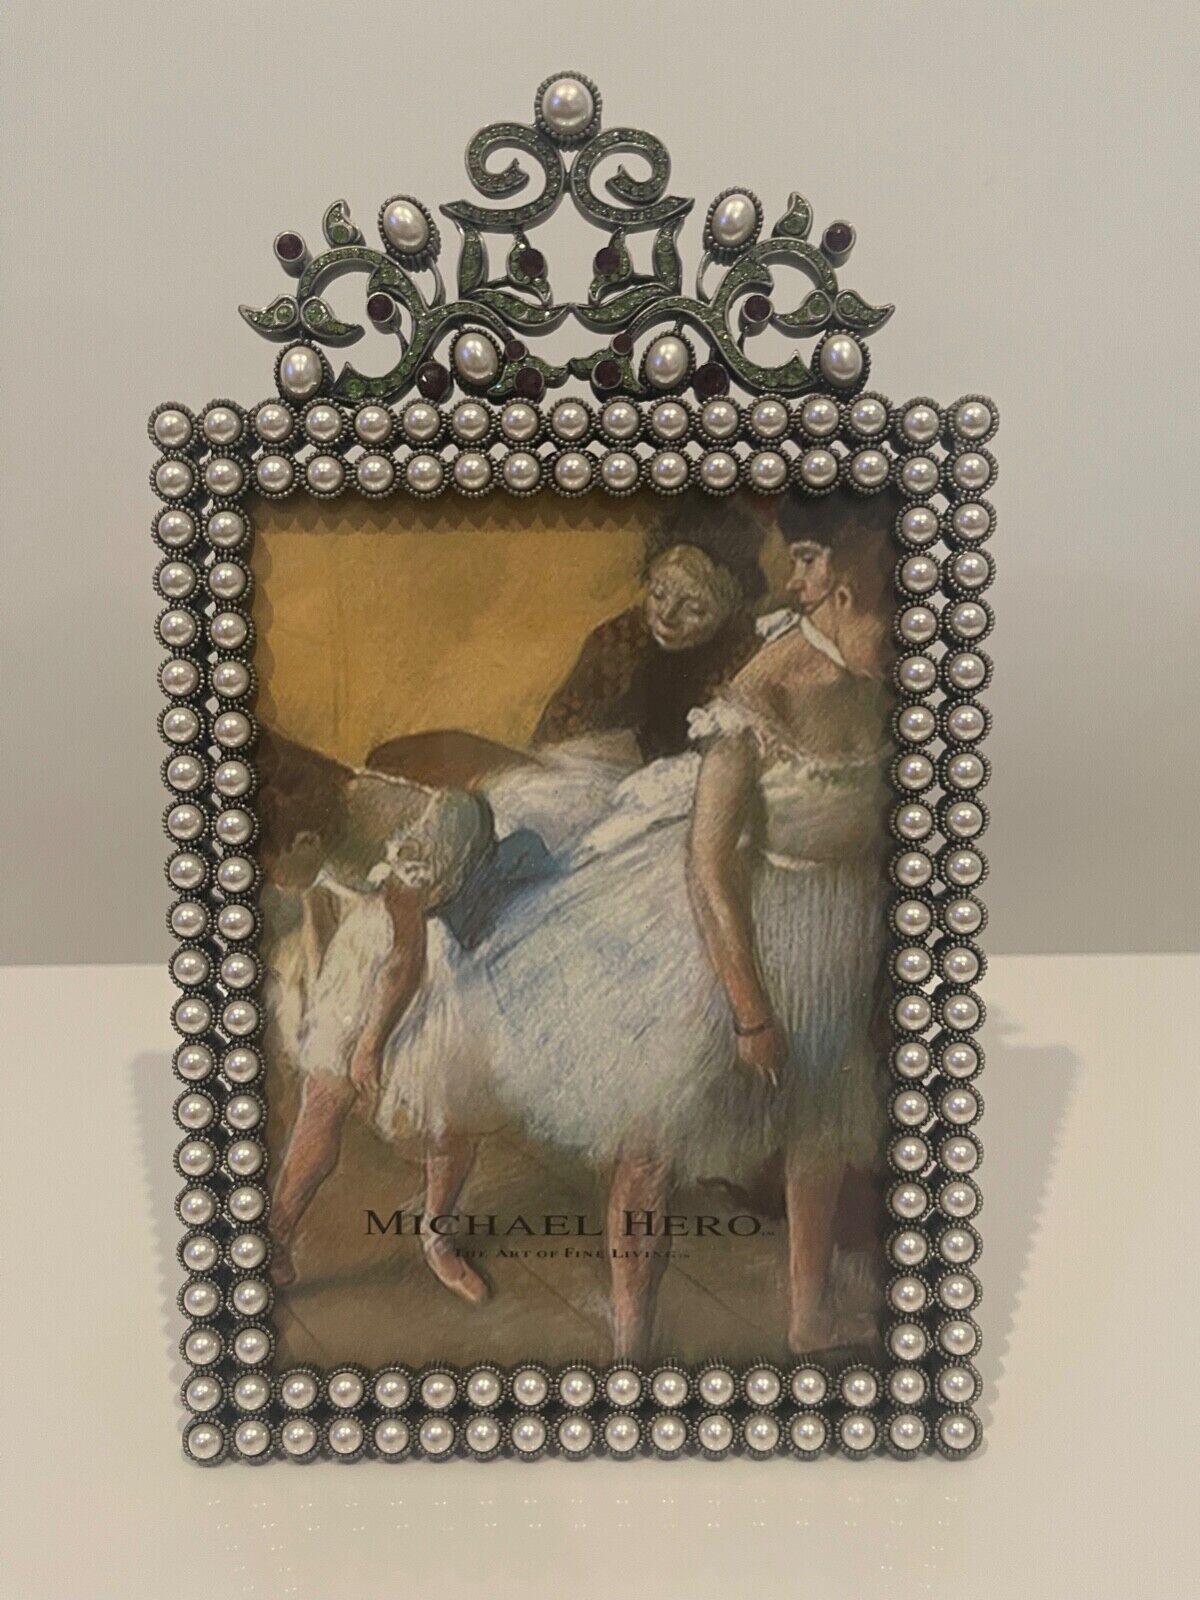 Michael Hero Swarovski Picture Frame with beautiful Embellishments. Exquisite.